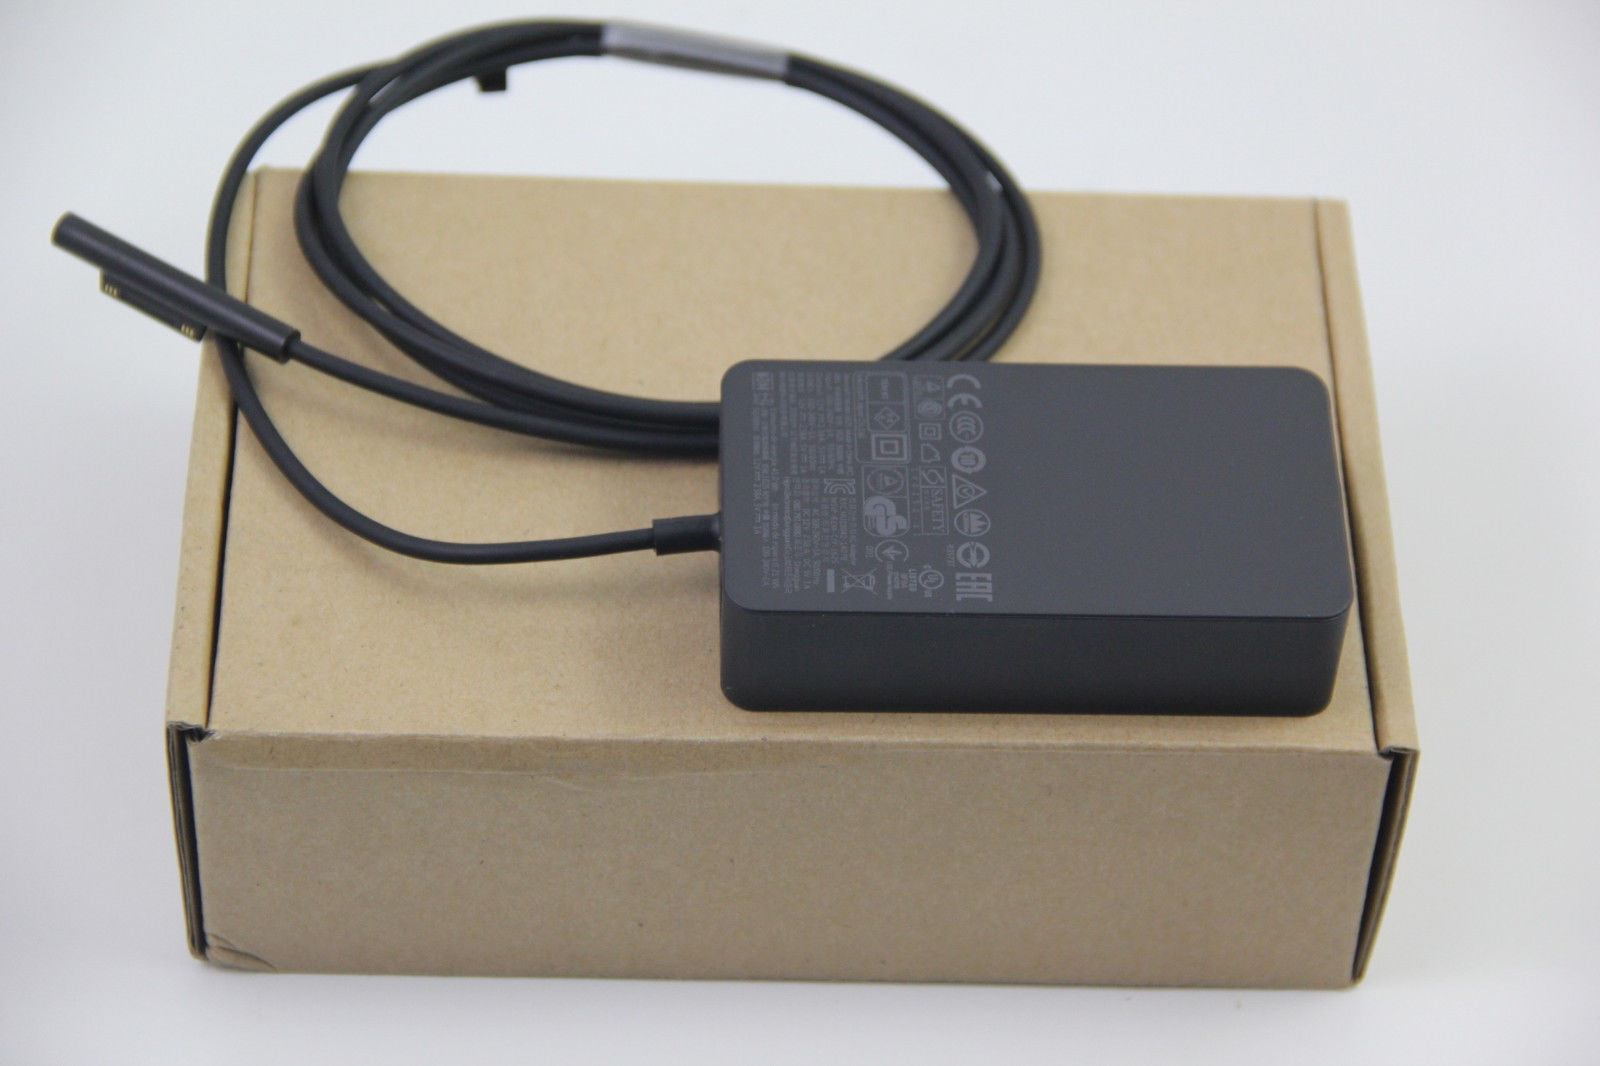 Genuine Original OEM 1625 Charger Adapter For Microsoft Surface Pro 3 Tablet PC